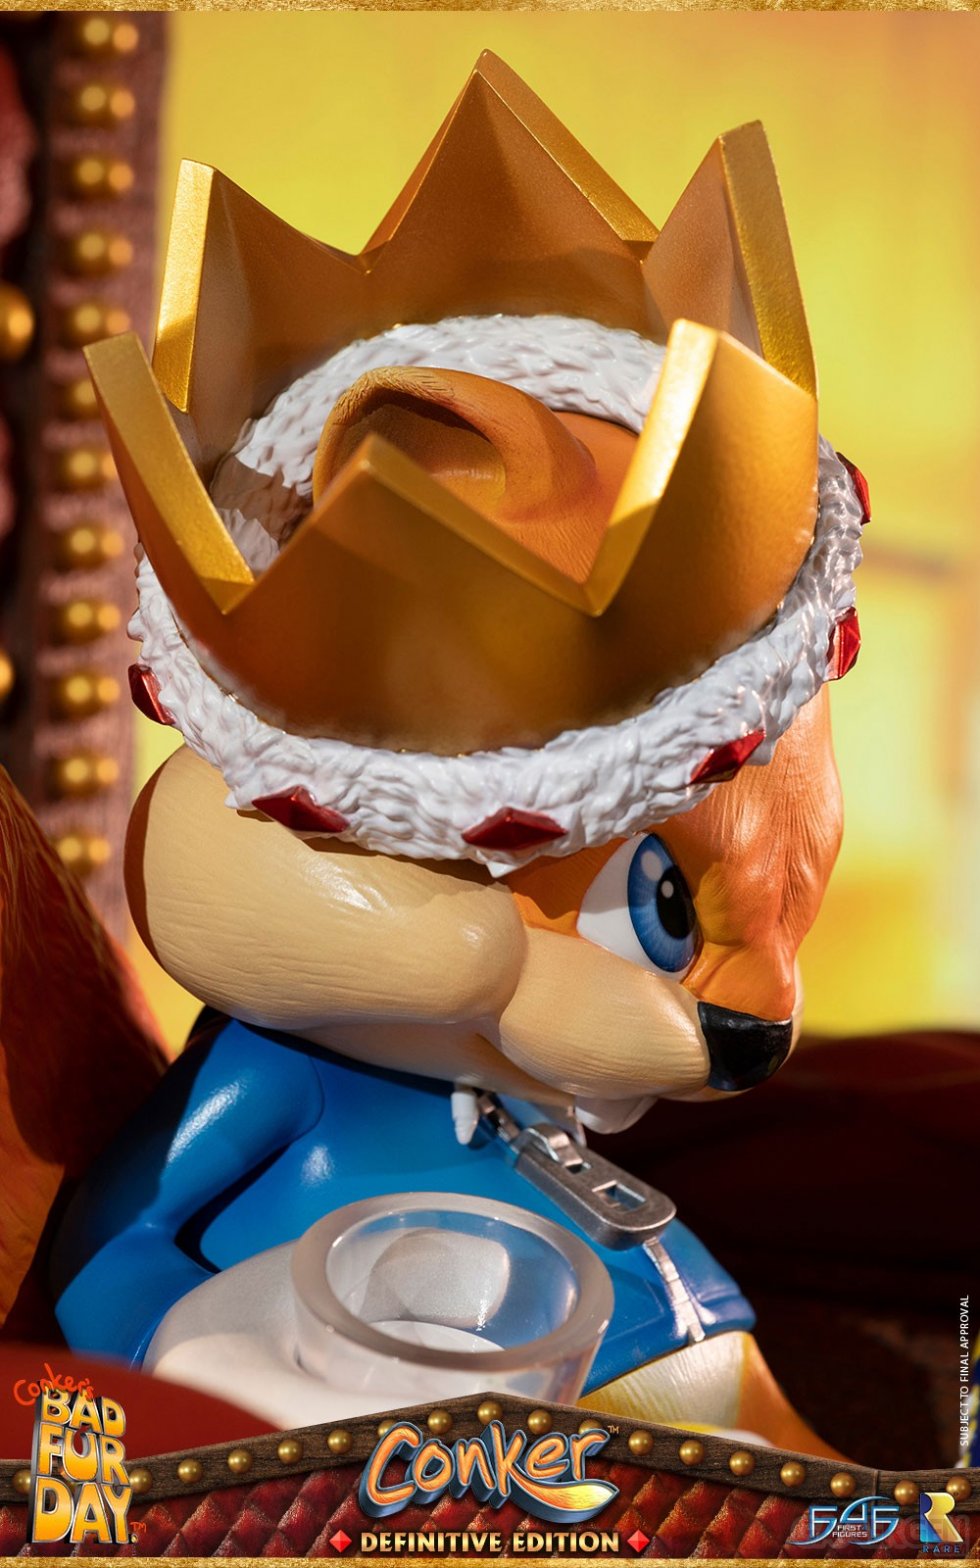 First 4 Figures Conker's Bad Fur Day figurine statuette images (3)